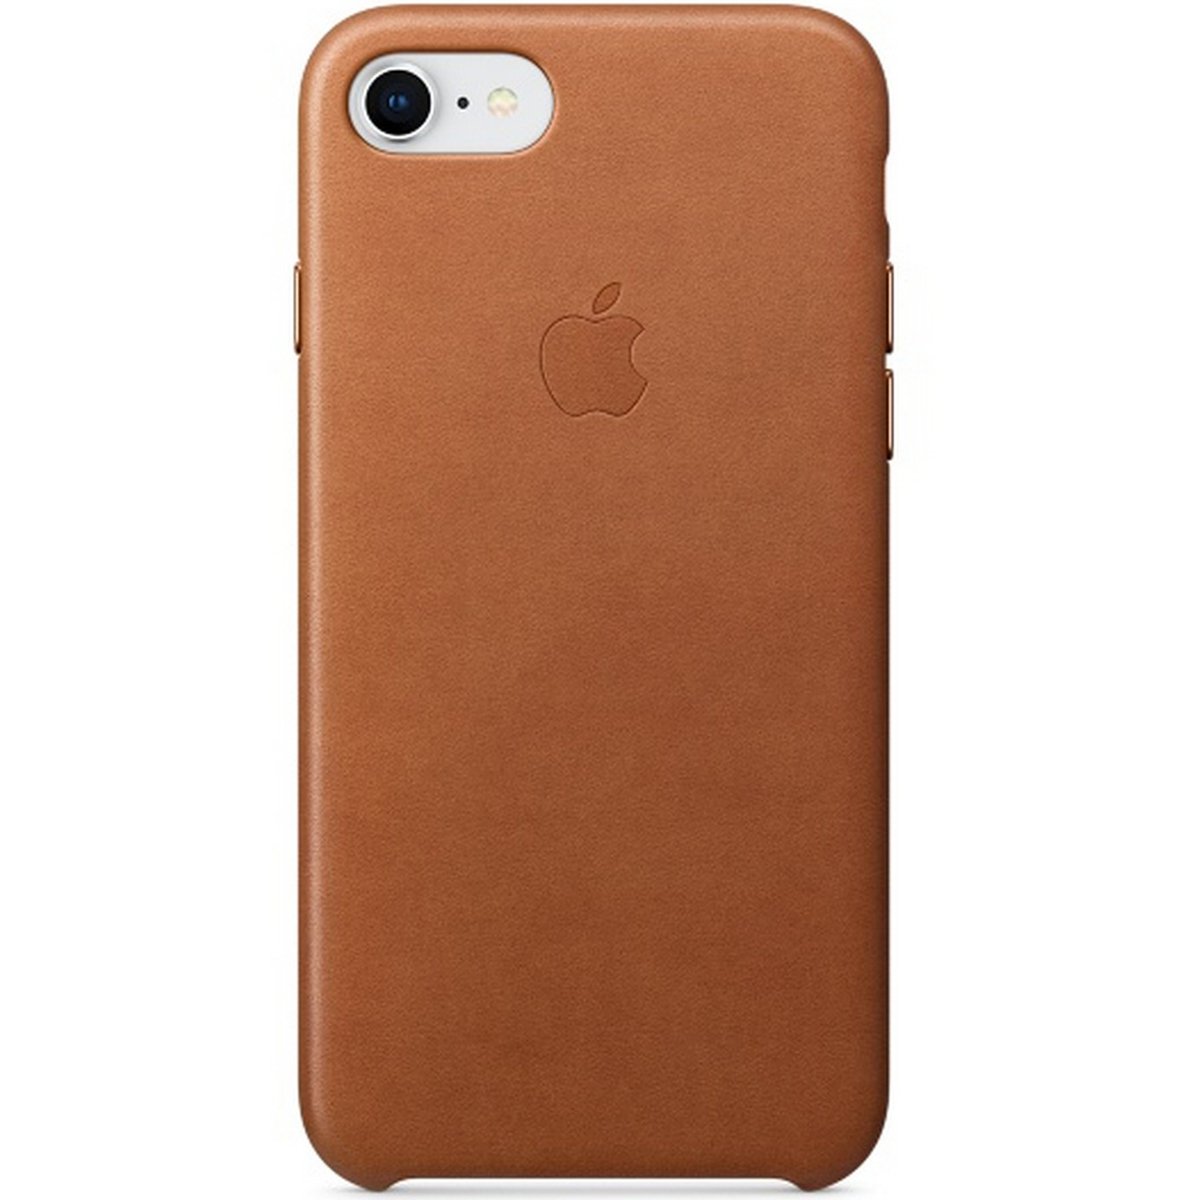 Apple iPhone 8 Leather Case Saddle Brown